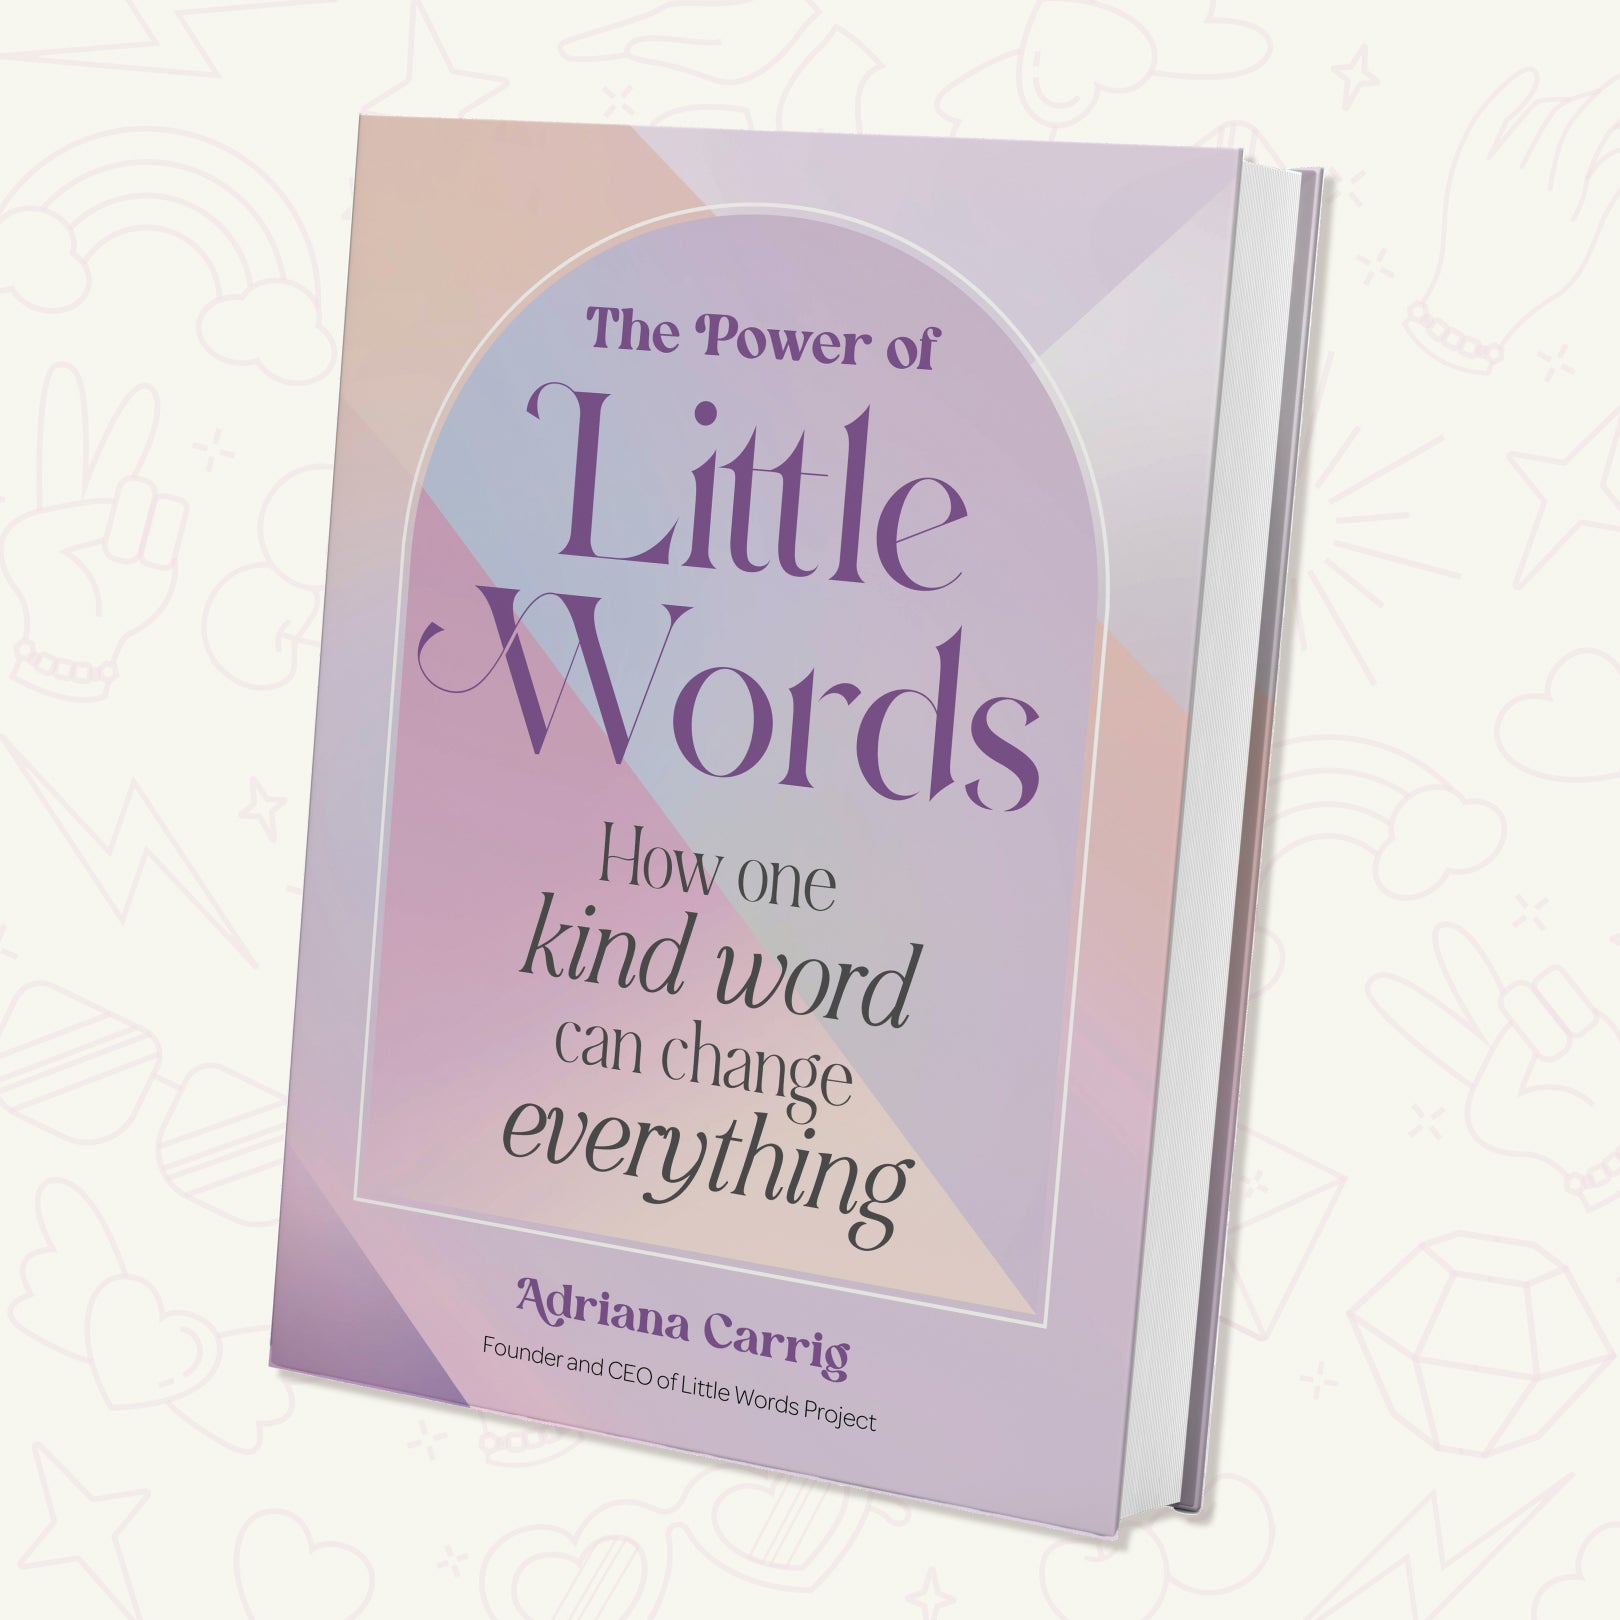 The Power of Little Words